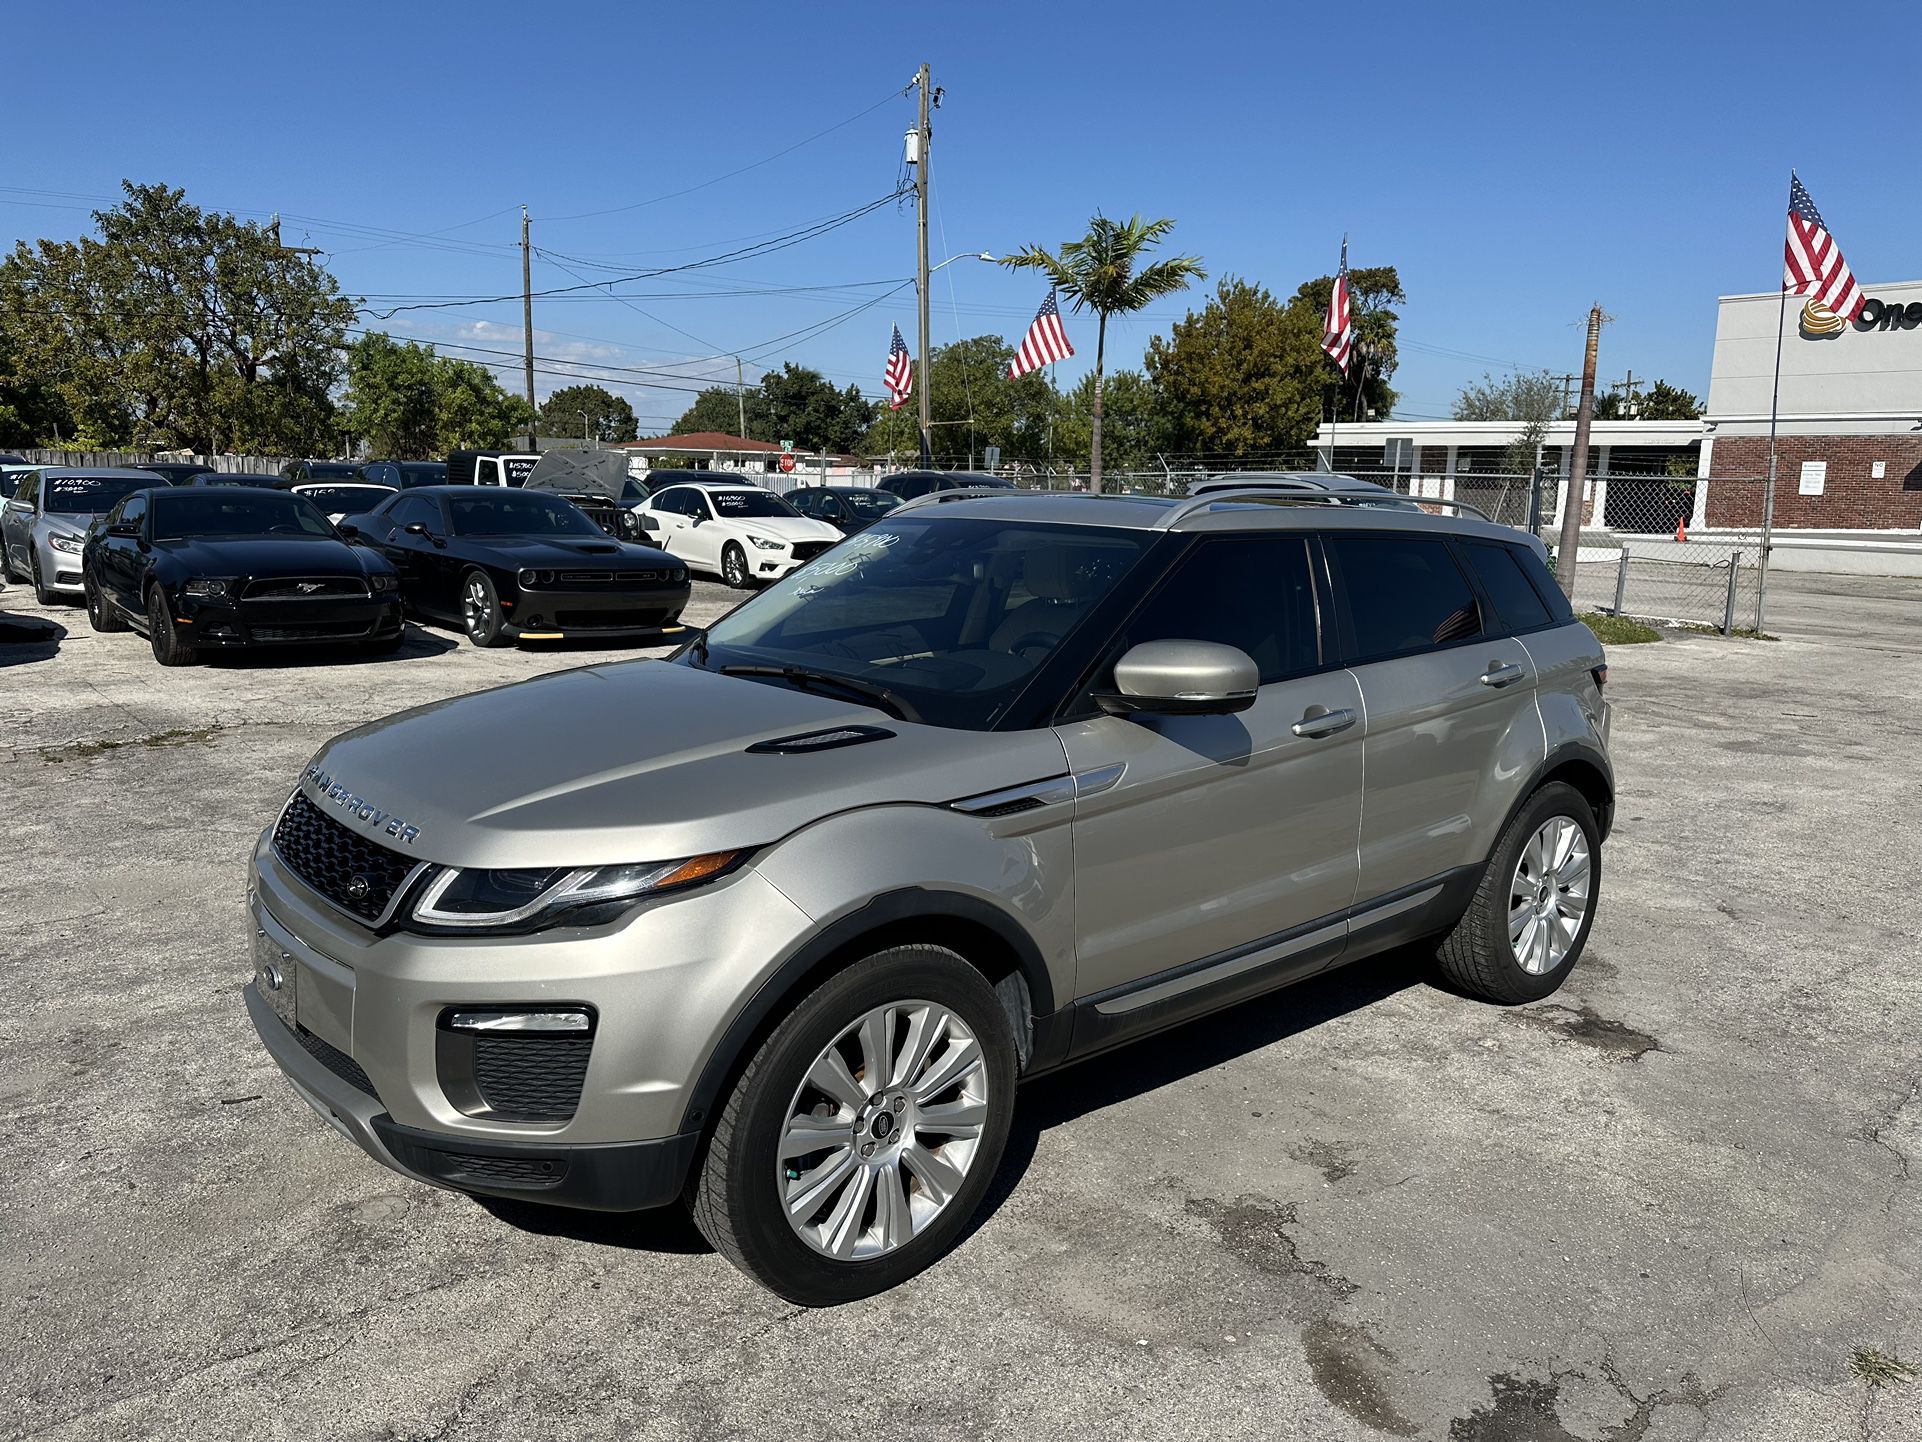 used 2017 Land Rover evoque - front view 2